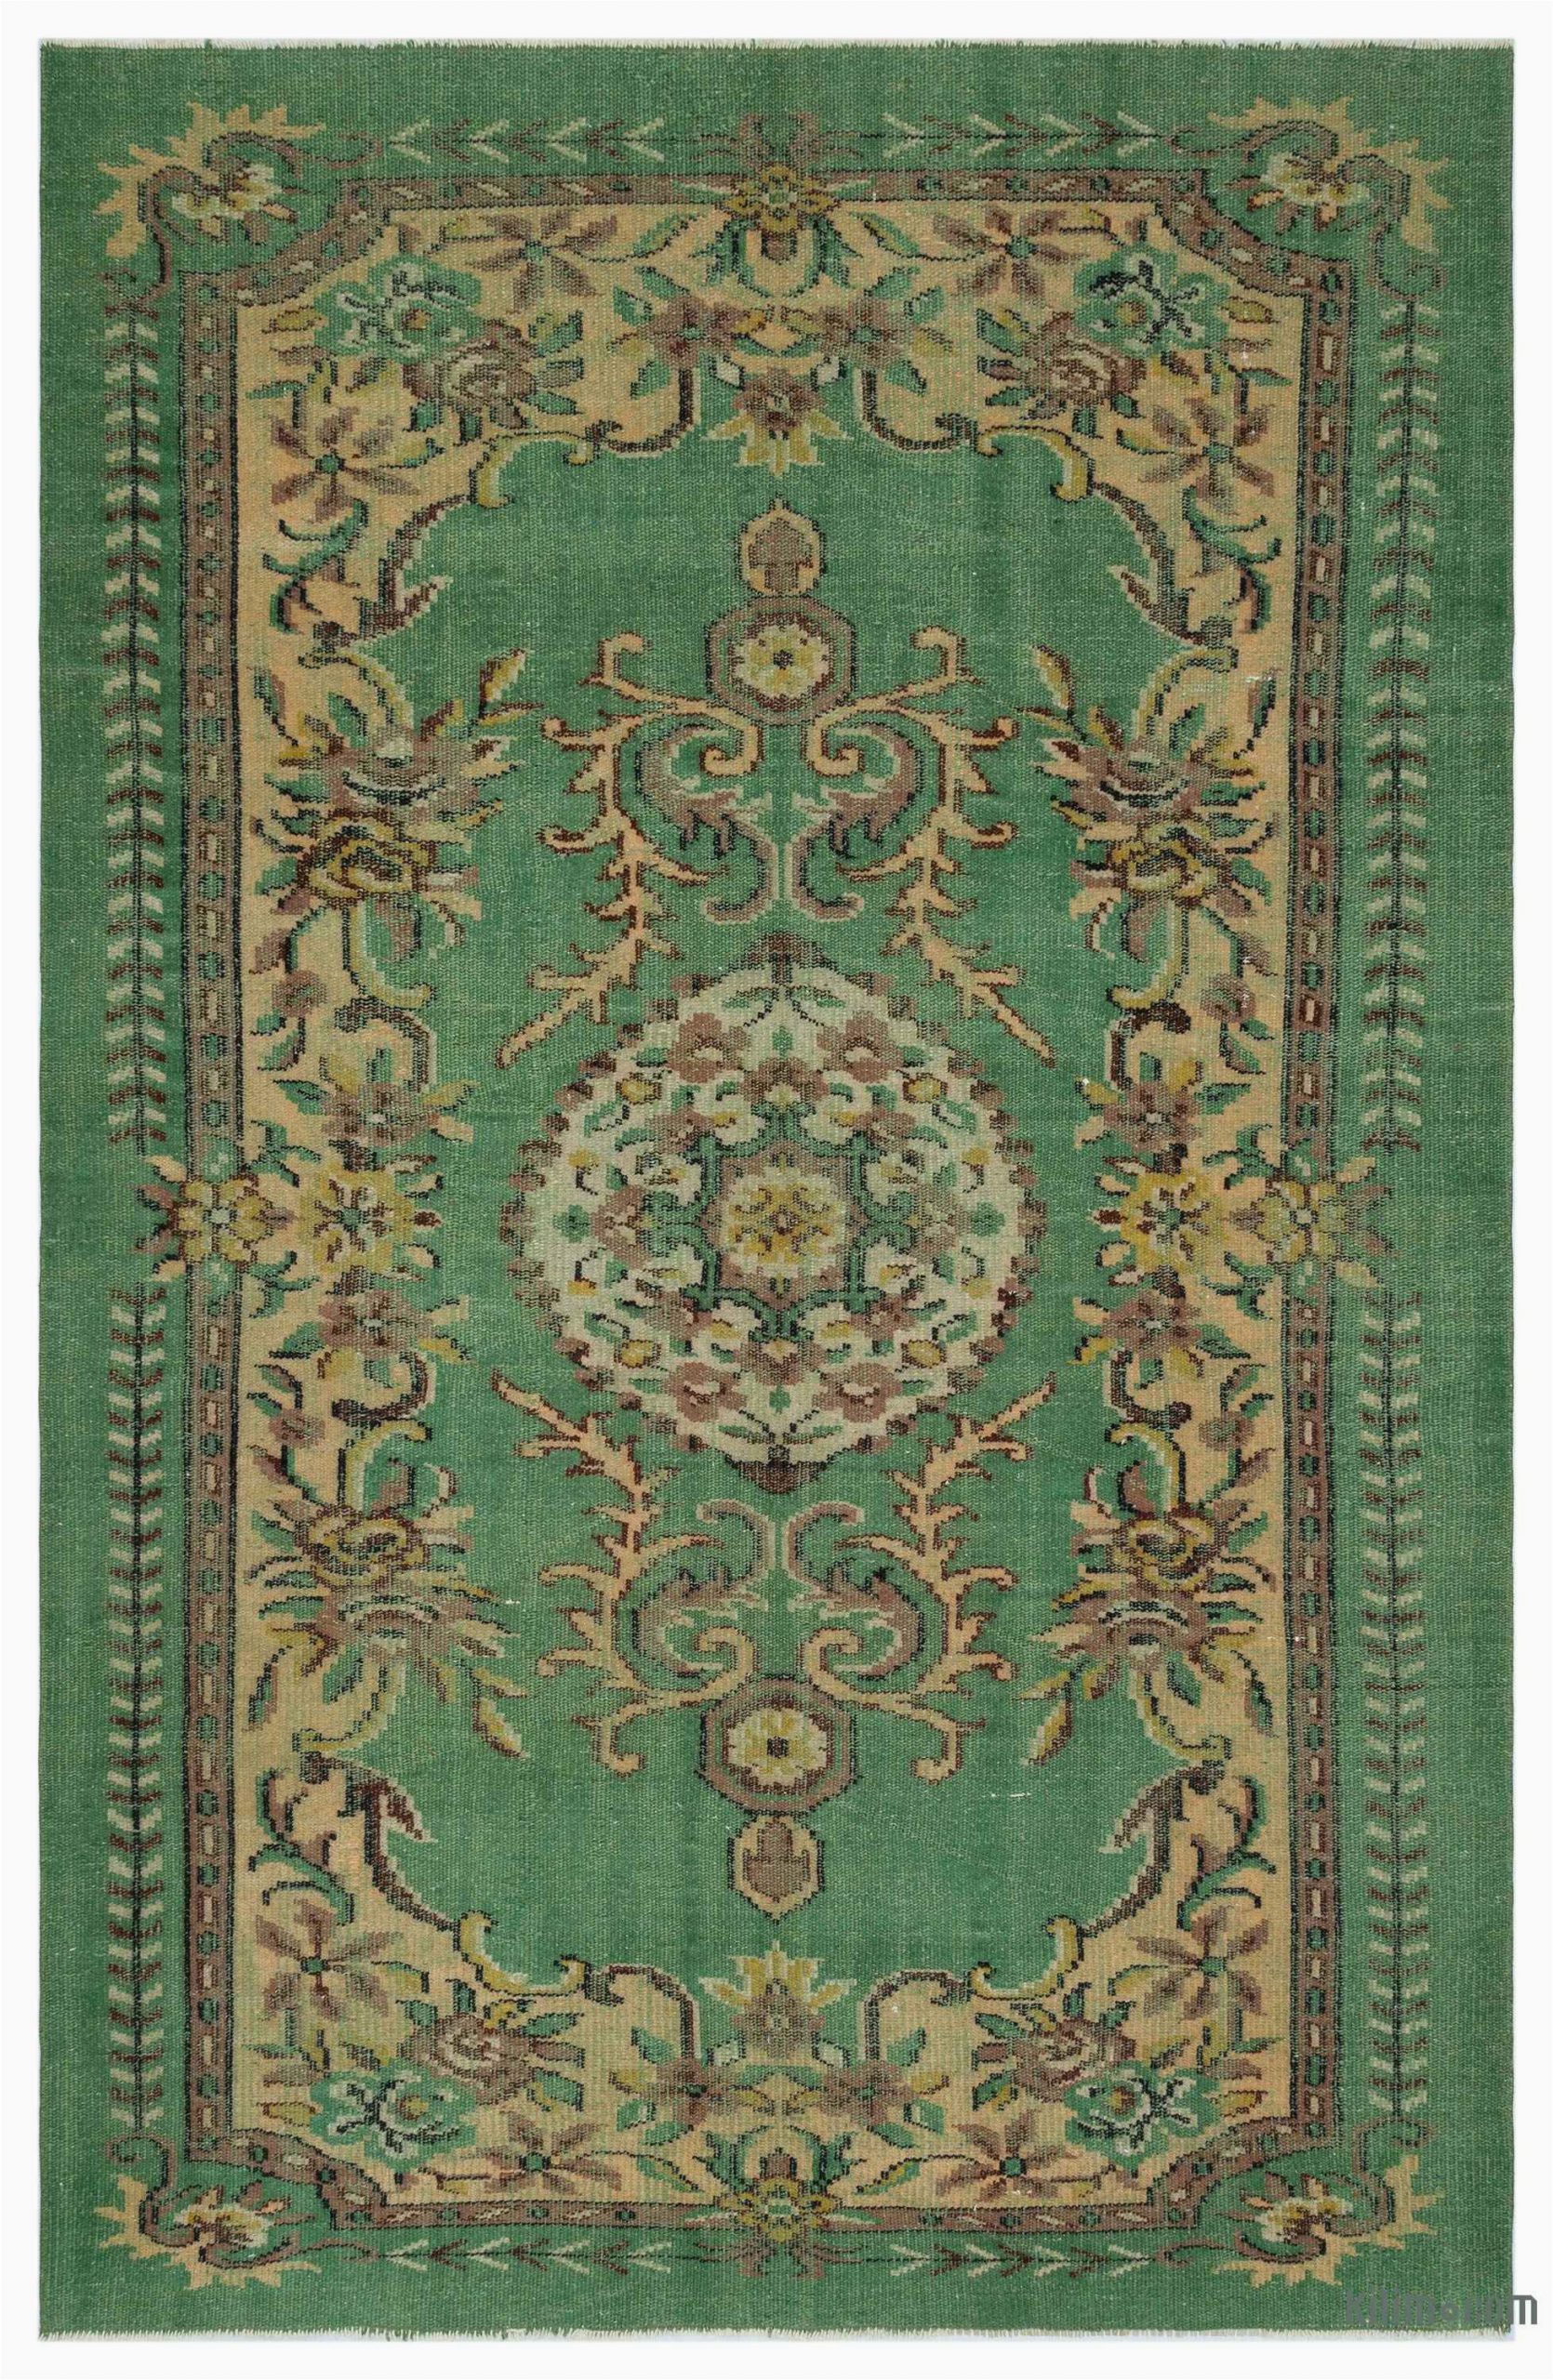 8 by 7 area Rugs Turkish Vintage area Rug 5 8 X 8 7 172 Cm X 261 Cm